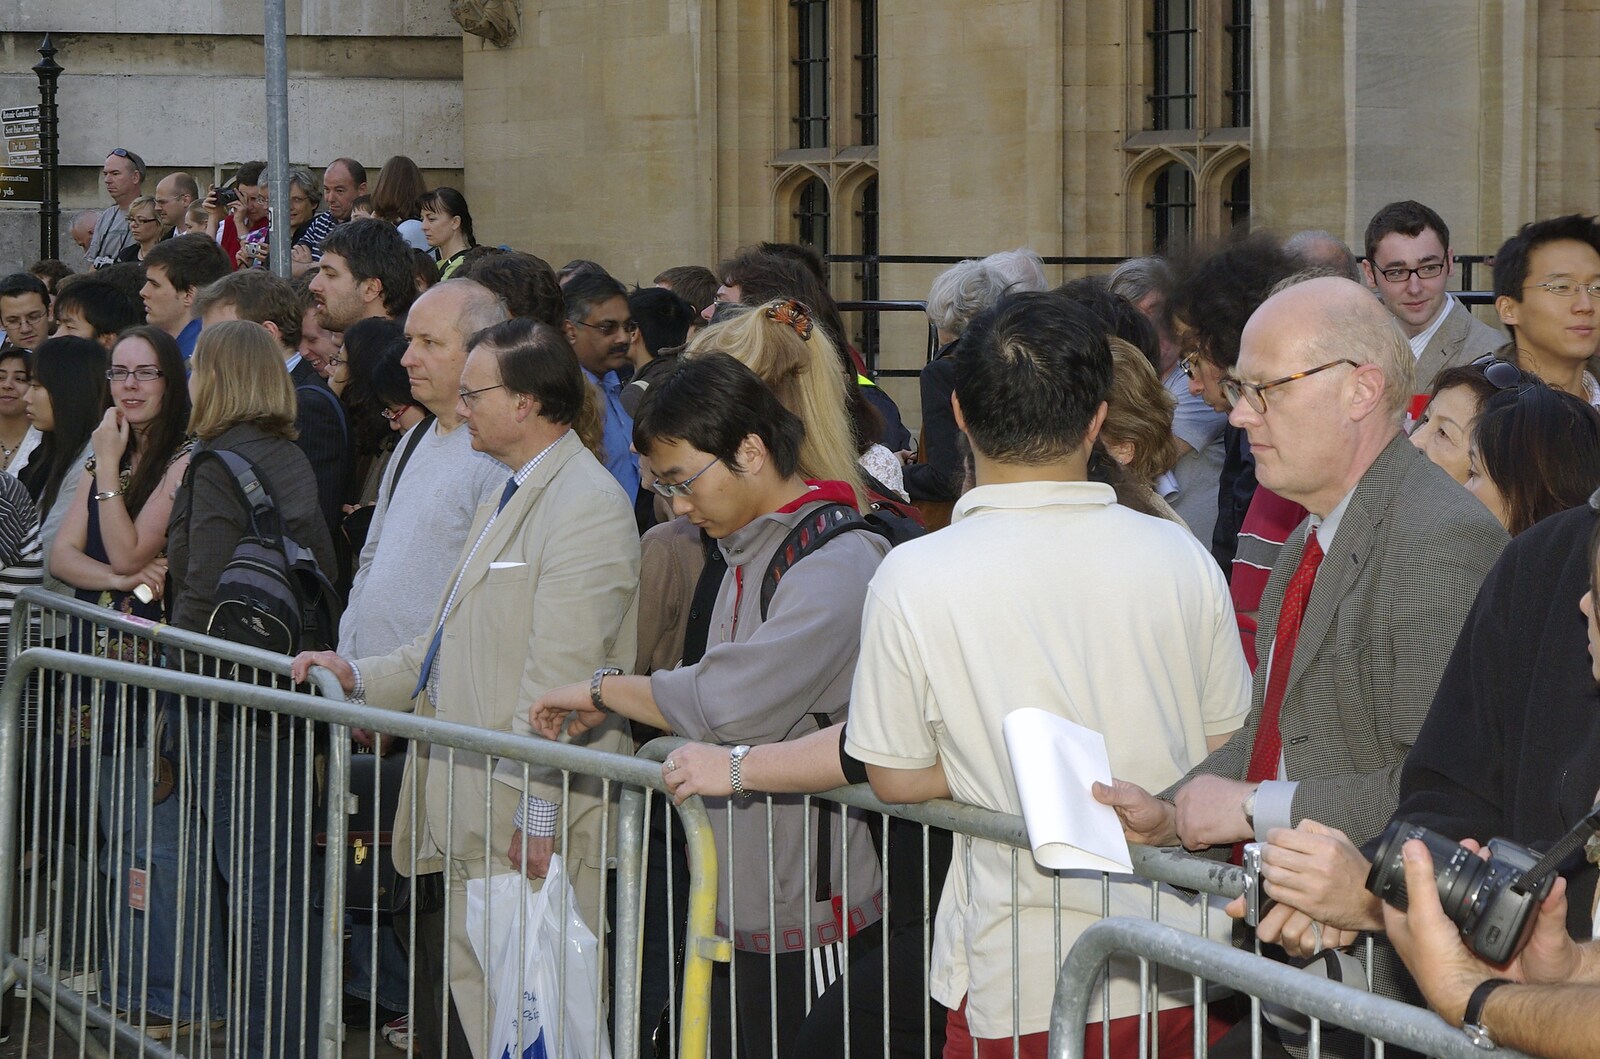 A Brief Time in History: Stephen Hawking and the Corpus Christi Clock, Benet Street, Cambridge - 19th September 2008: Crowds behind barriers